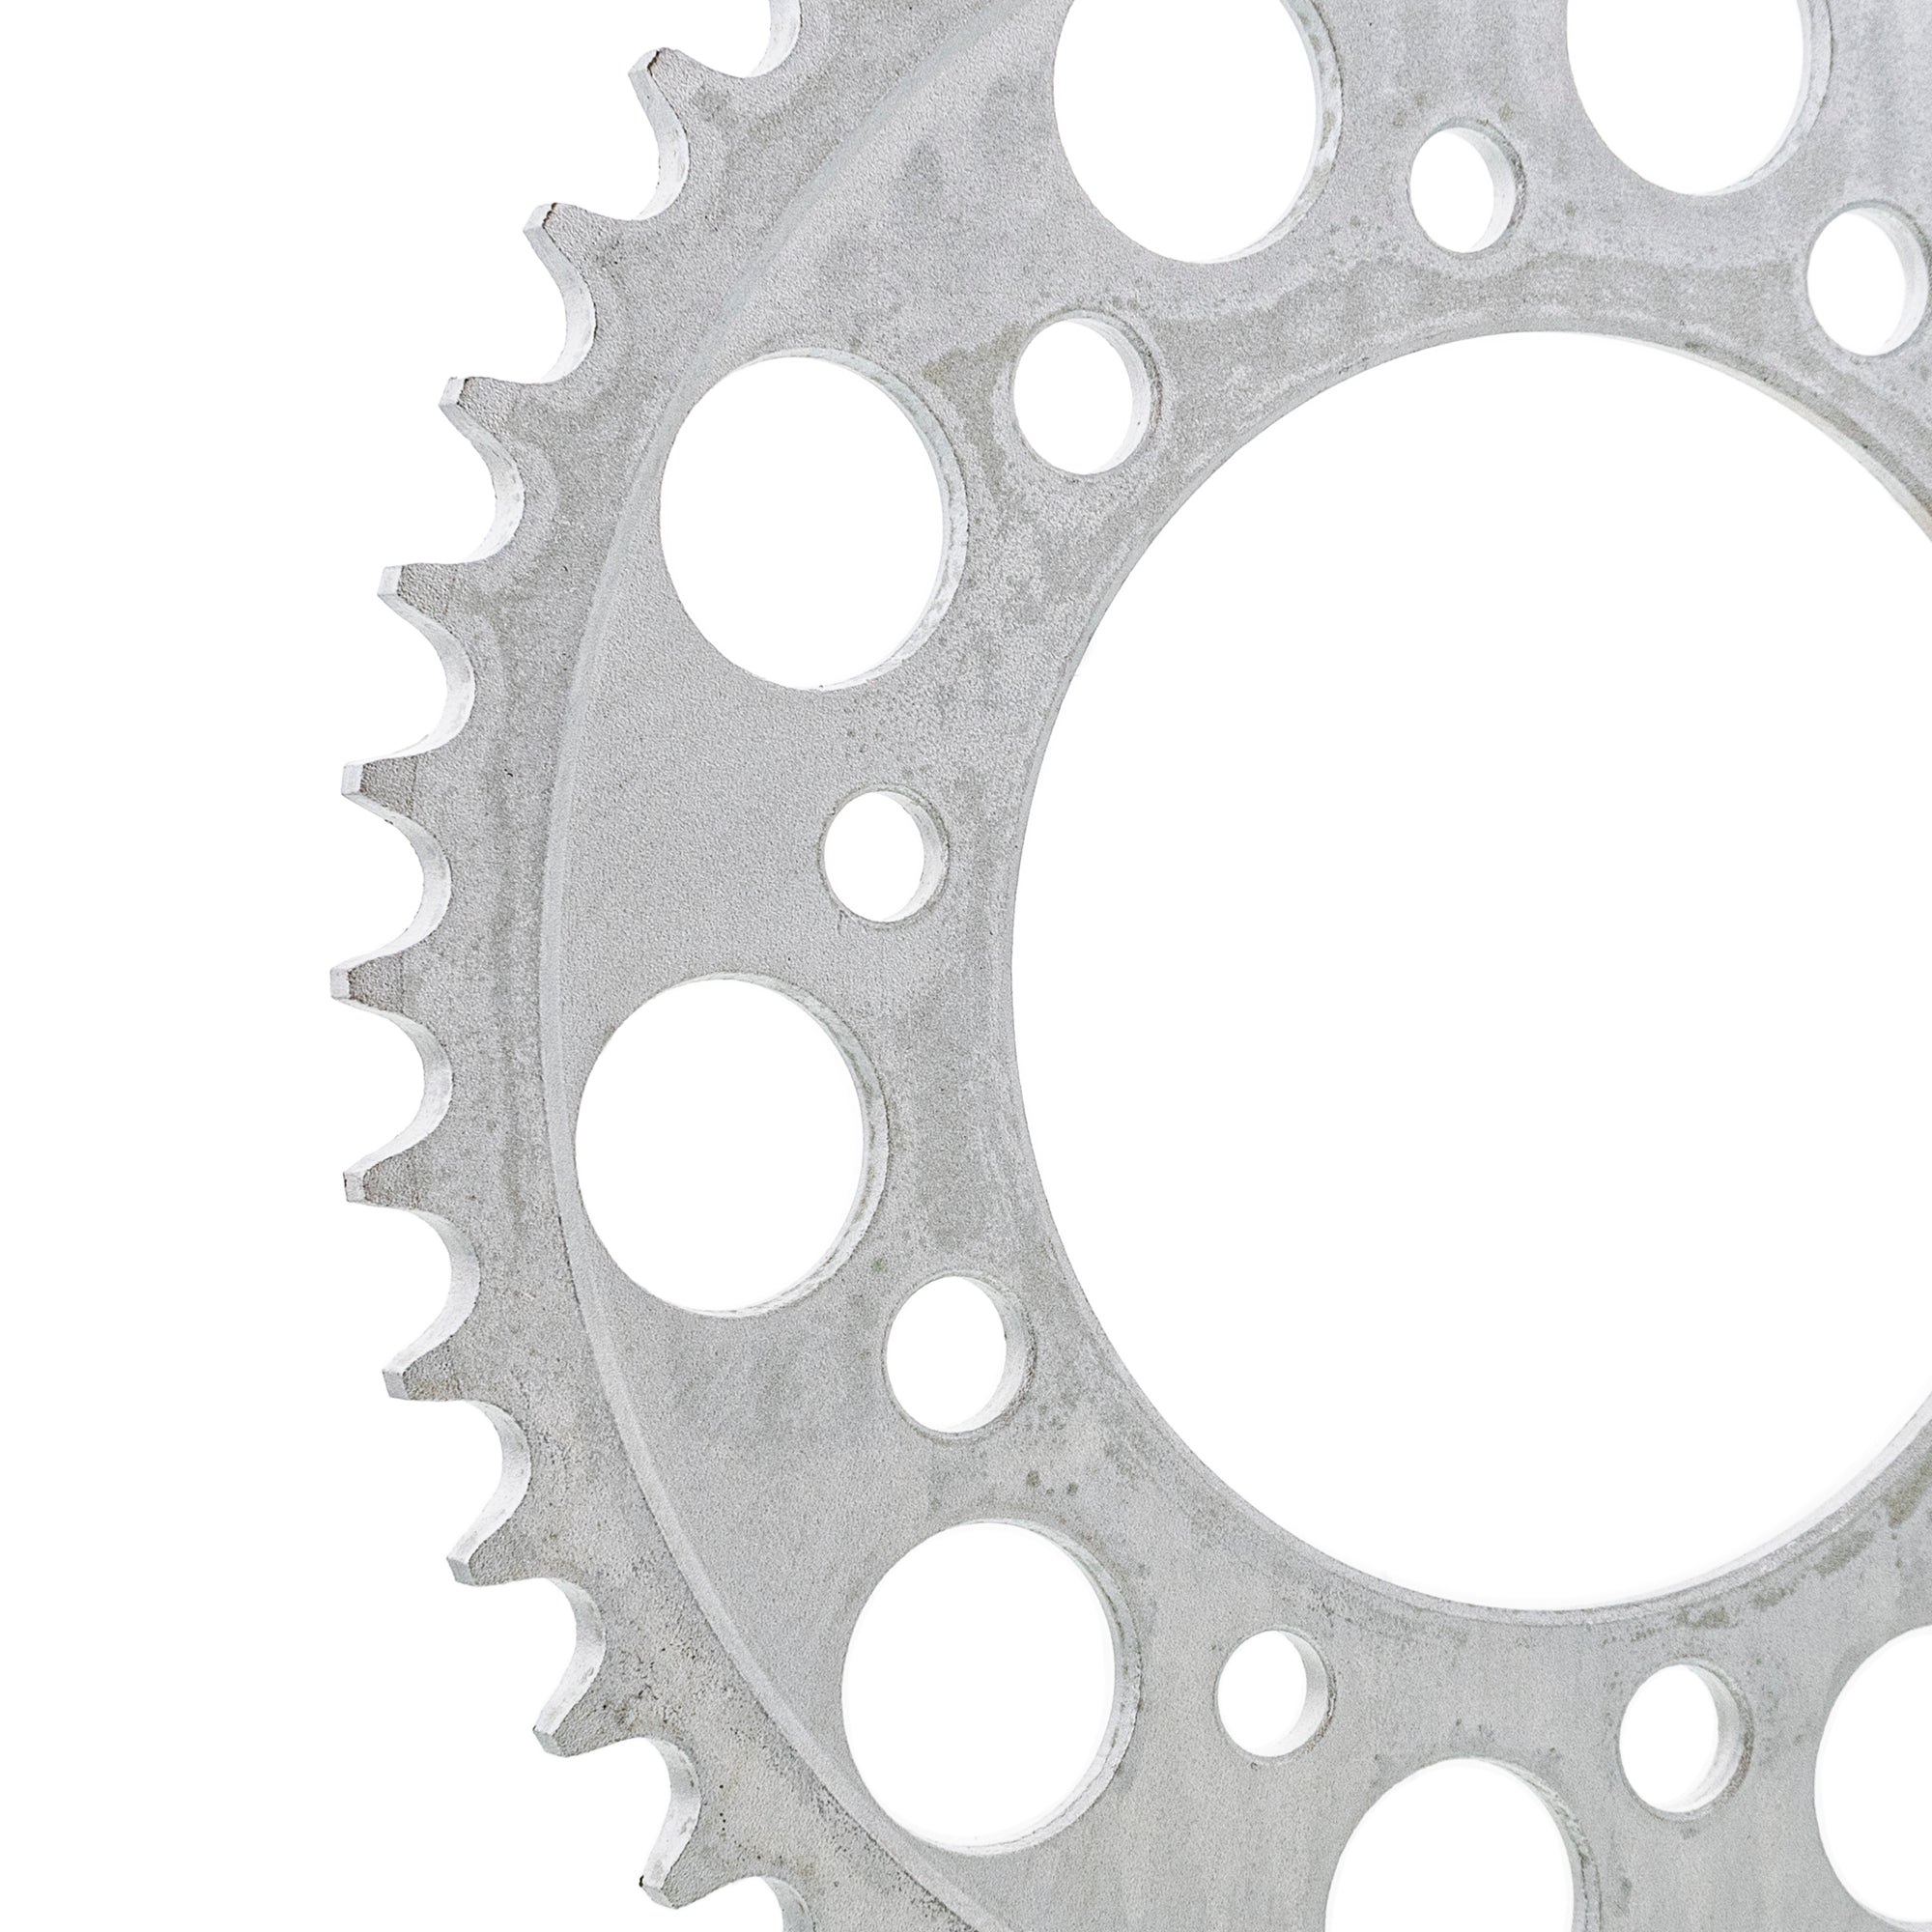 520 Pitch 45 Tooth Rear Drive Sprocket for Honda CBR600F4 Chain